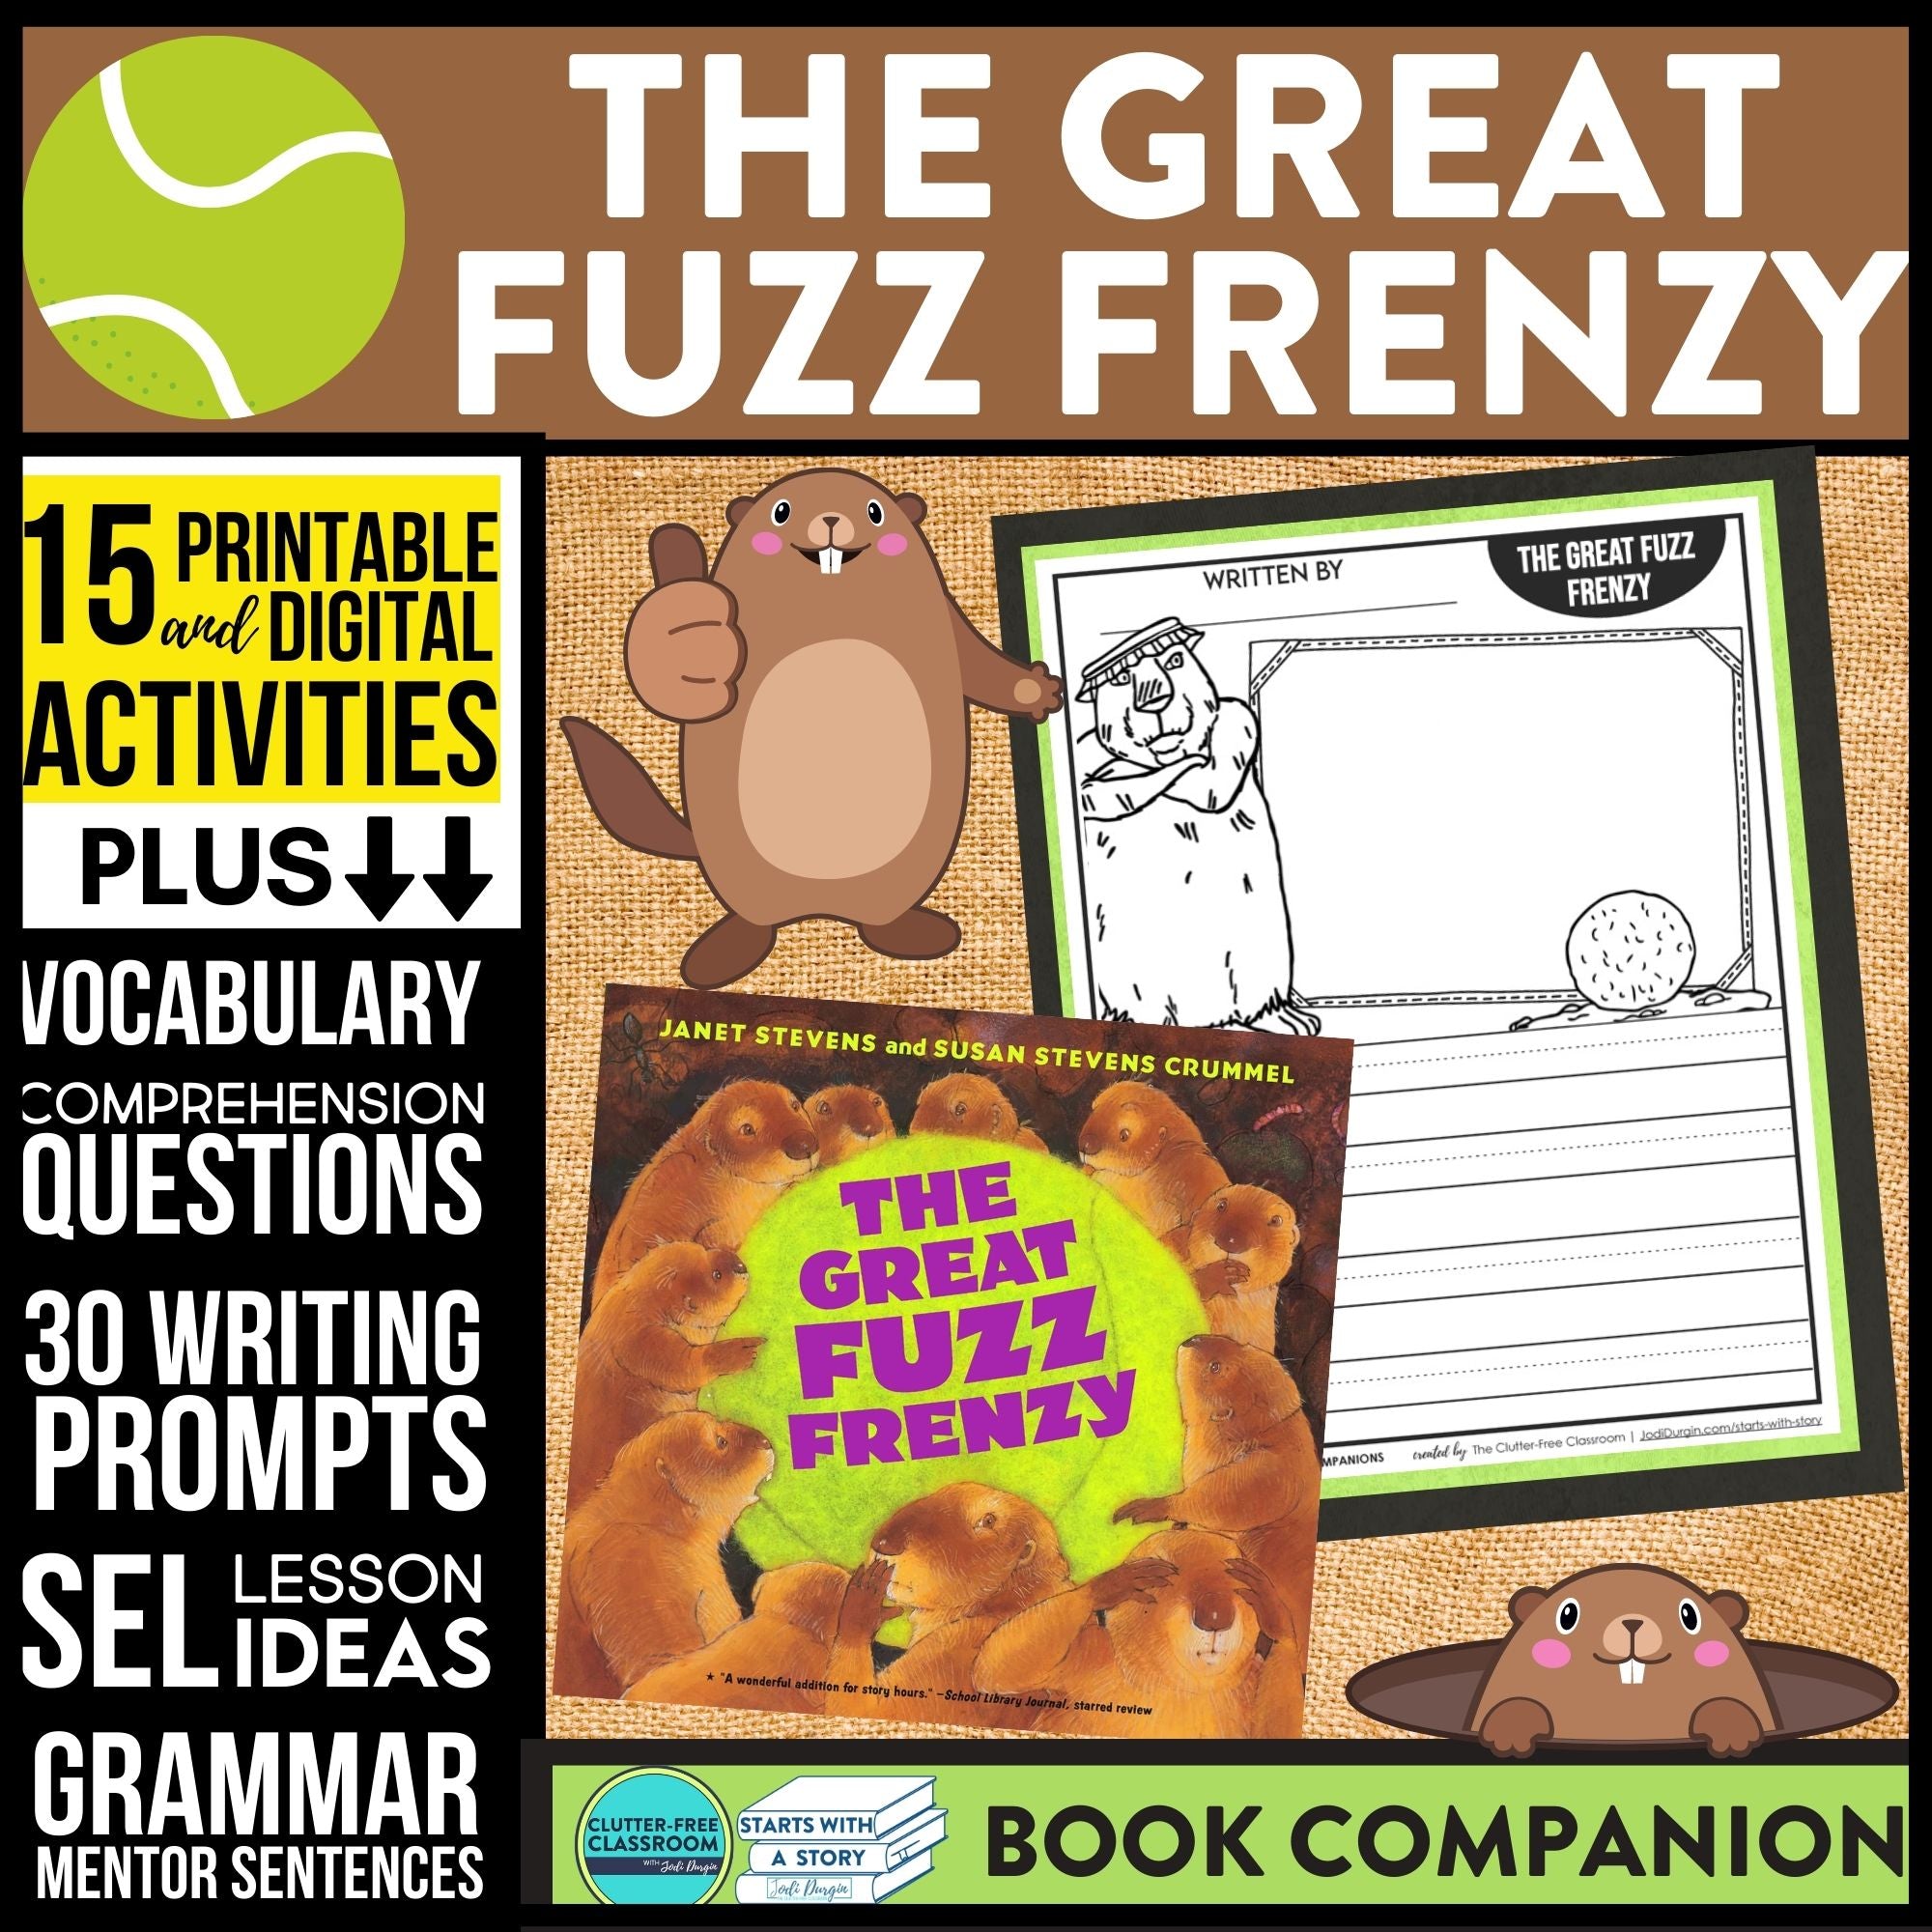 THE GREAT FUZZ FRENZY activities and lesson plan ideas